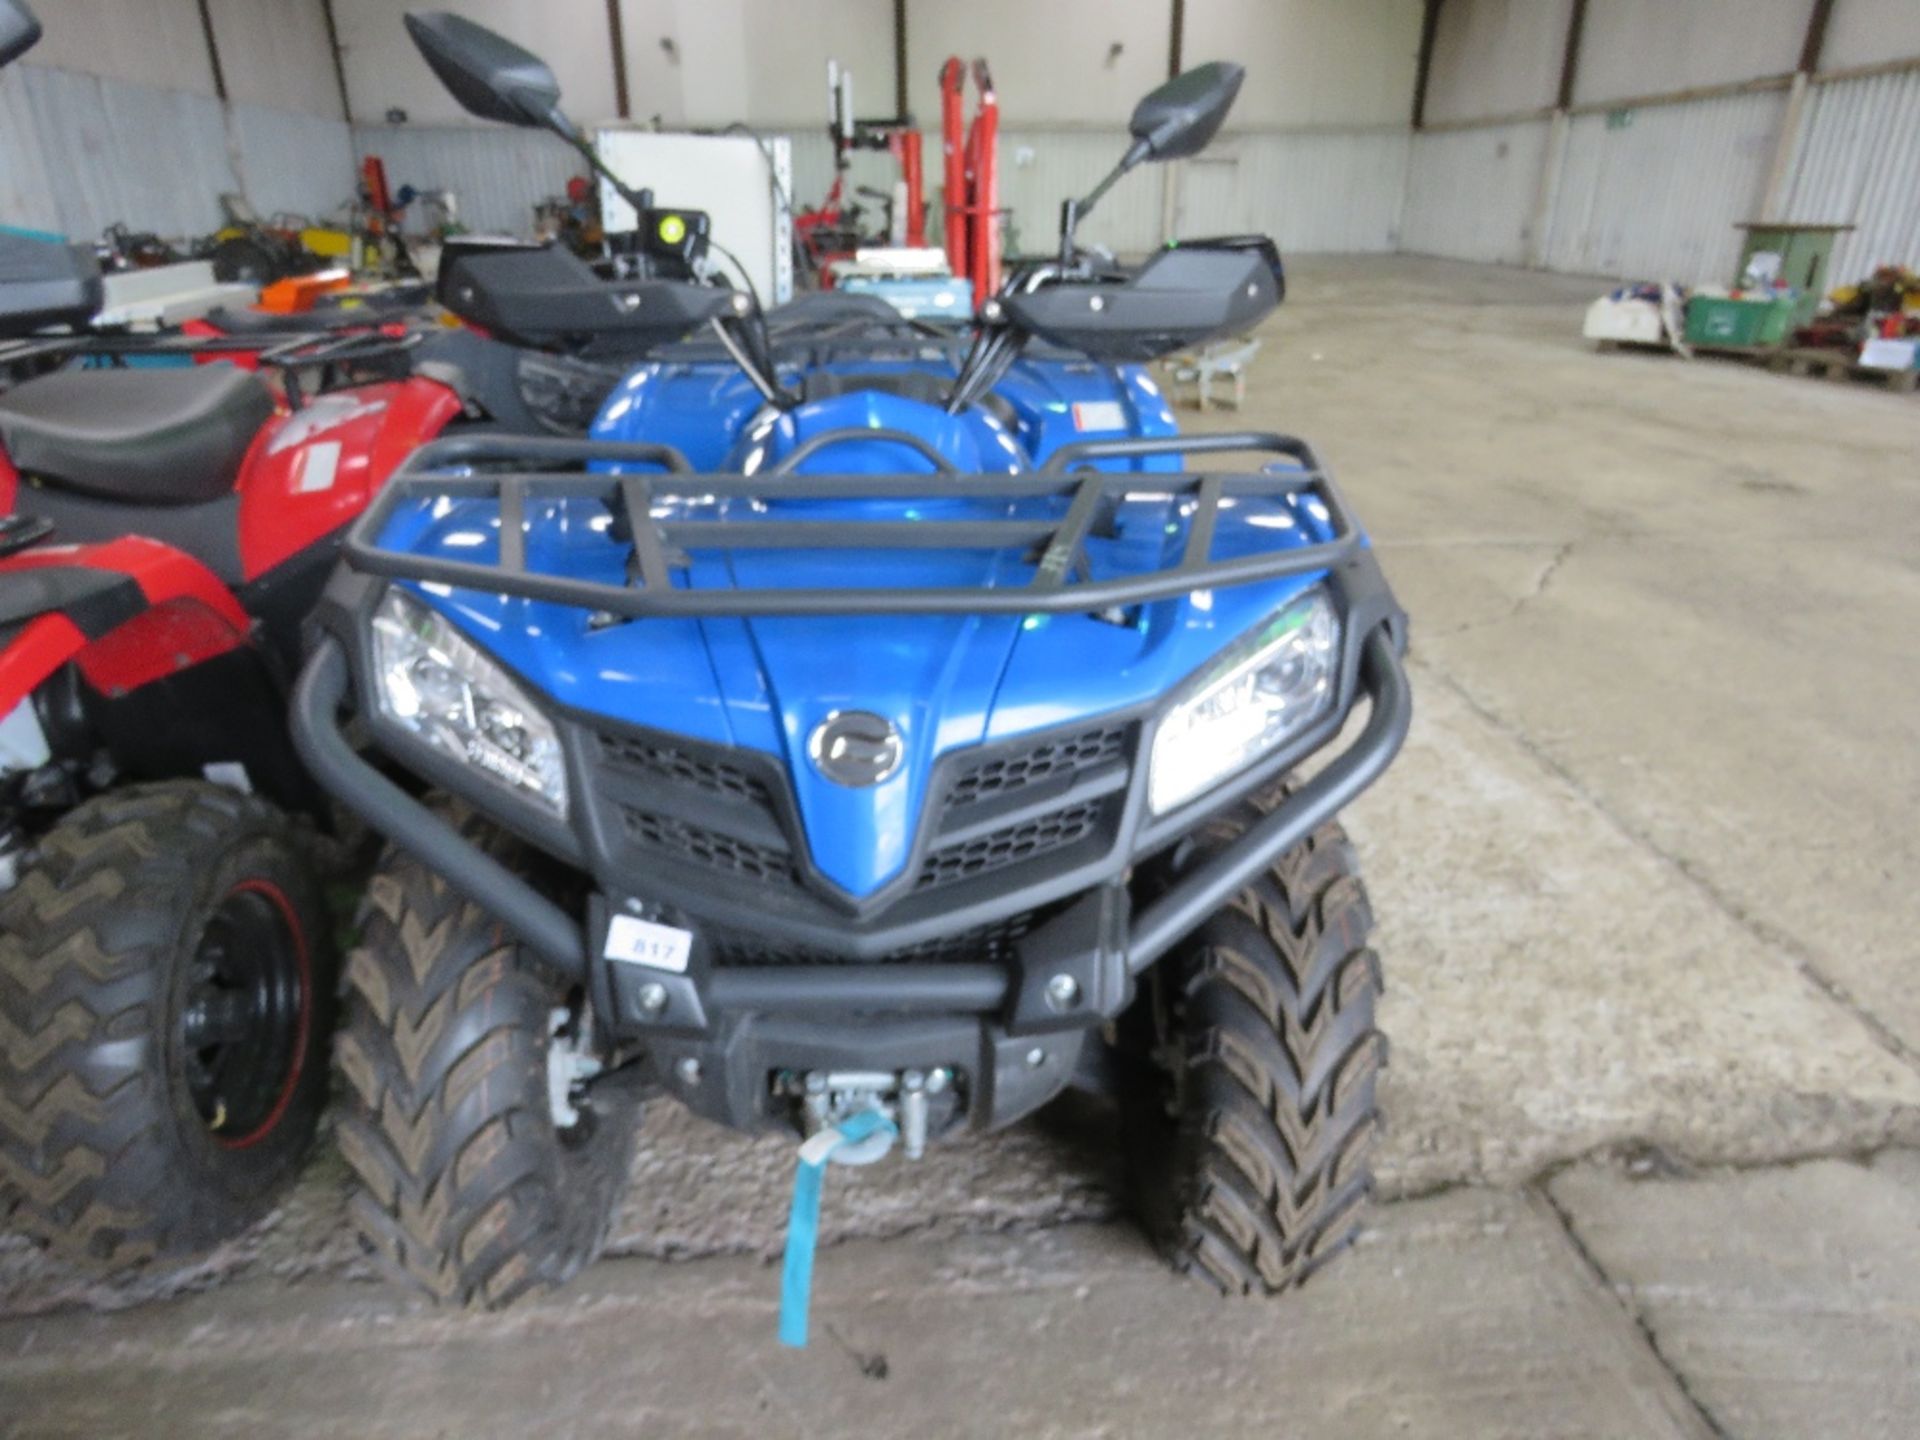 CFMOTO/QUADZILLA 450 4WD QUAD BIKE 4WD WITH WINCH. 7.8 REC MILES. WHEN TESTED WAS SEEN TO DRIVE, STE - Image 2 of 8